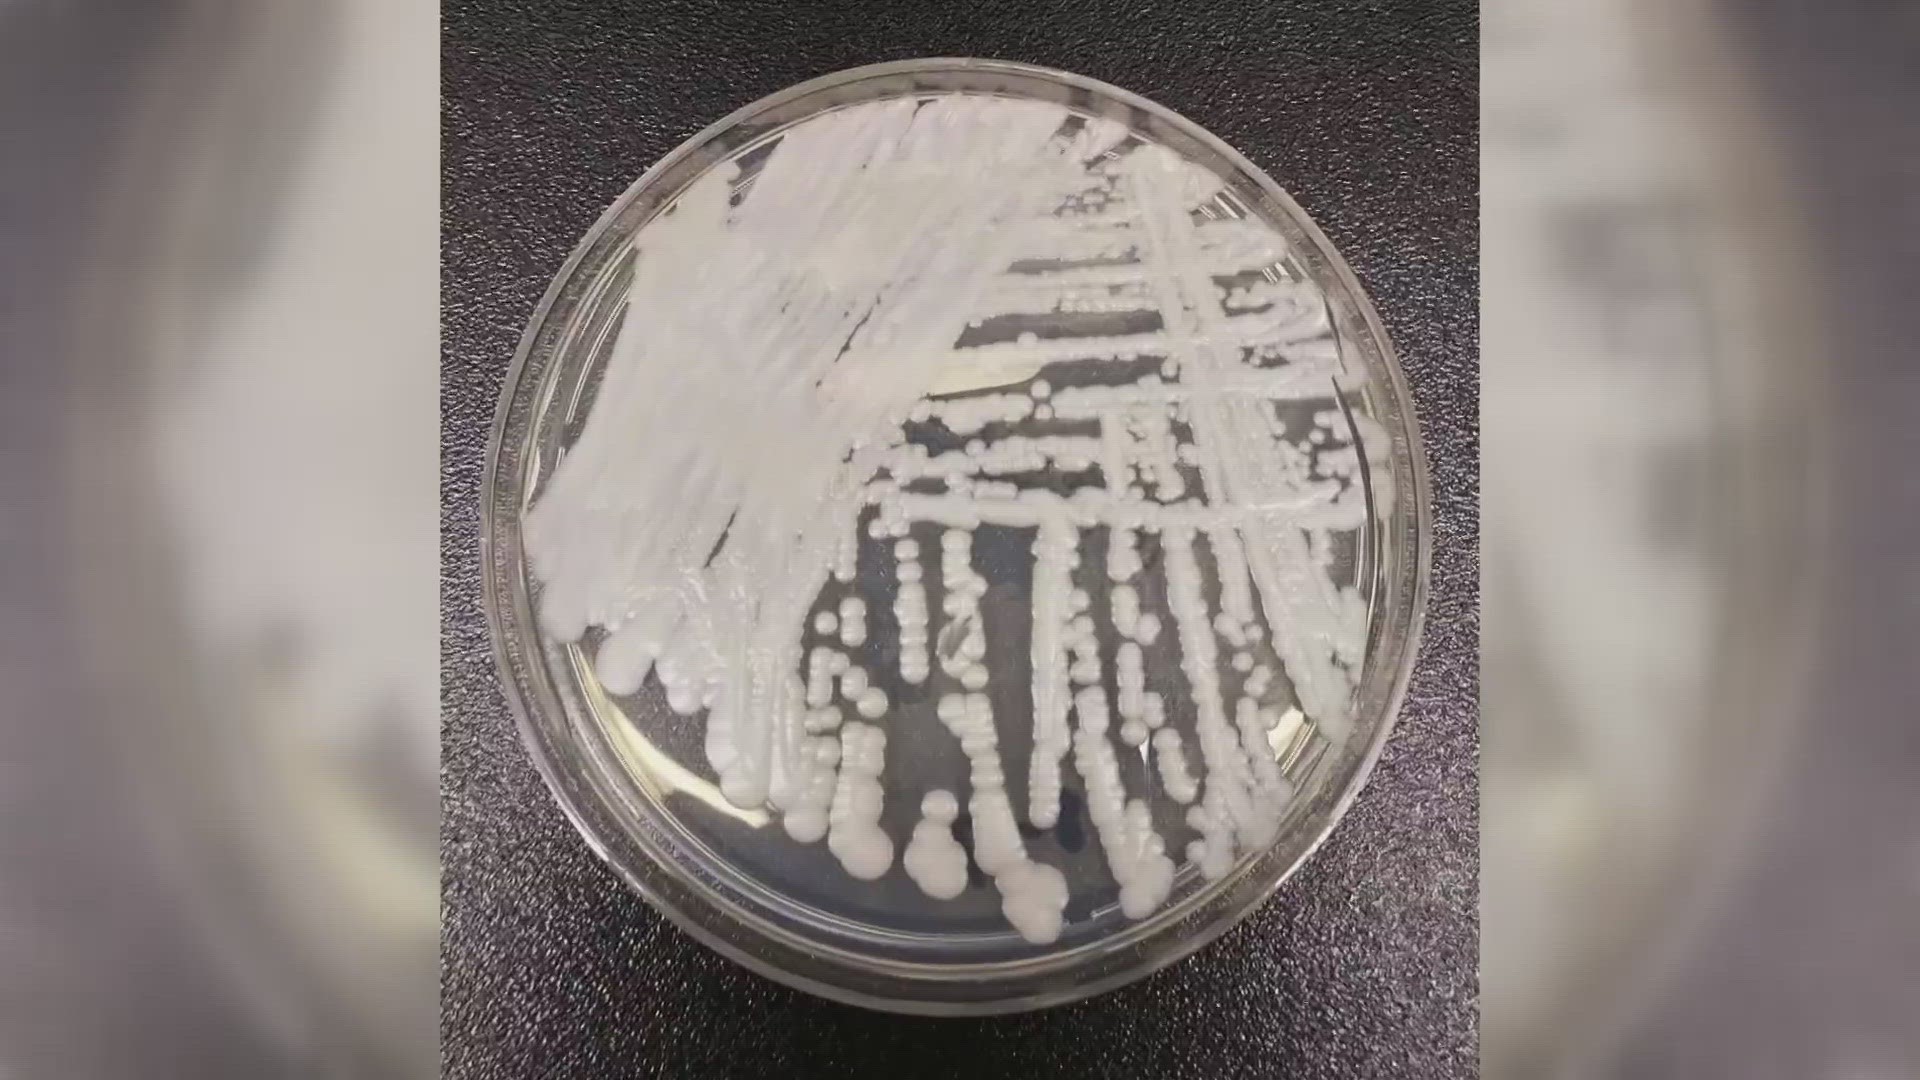 The fungus is a multi-drug resistant yeast able to spread in healthcare settings and can cause serious, hard-to-treat infections. Here's what you should know.